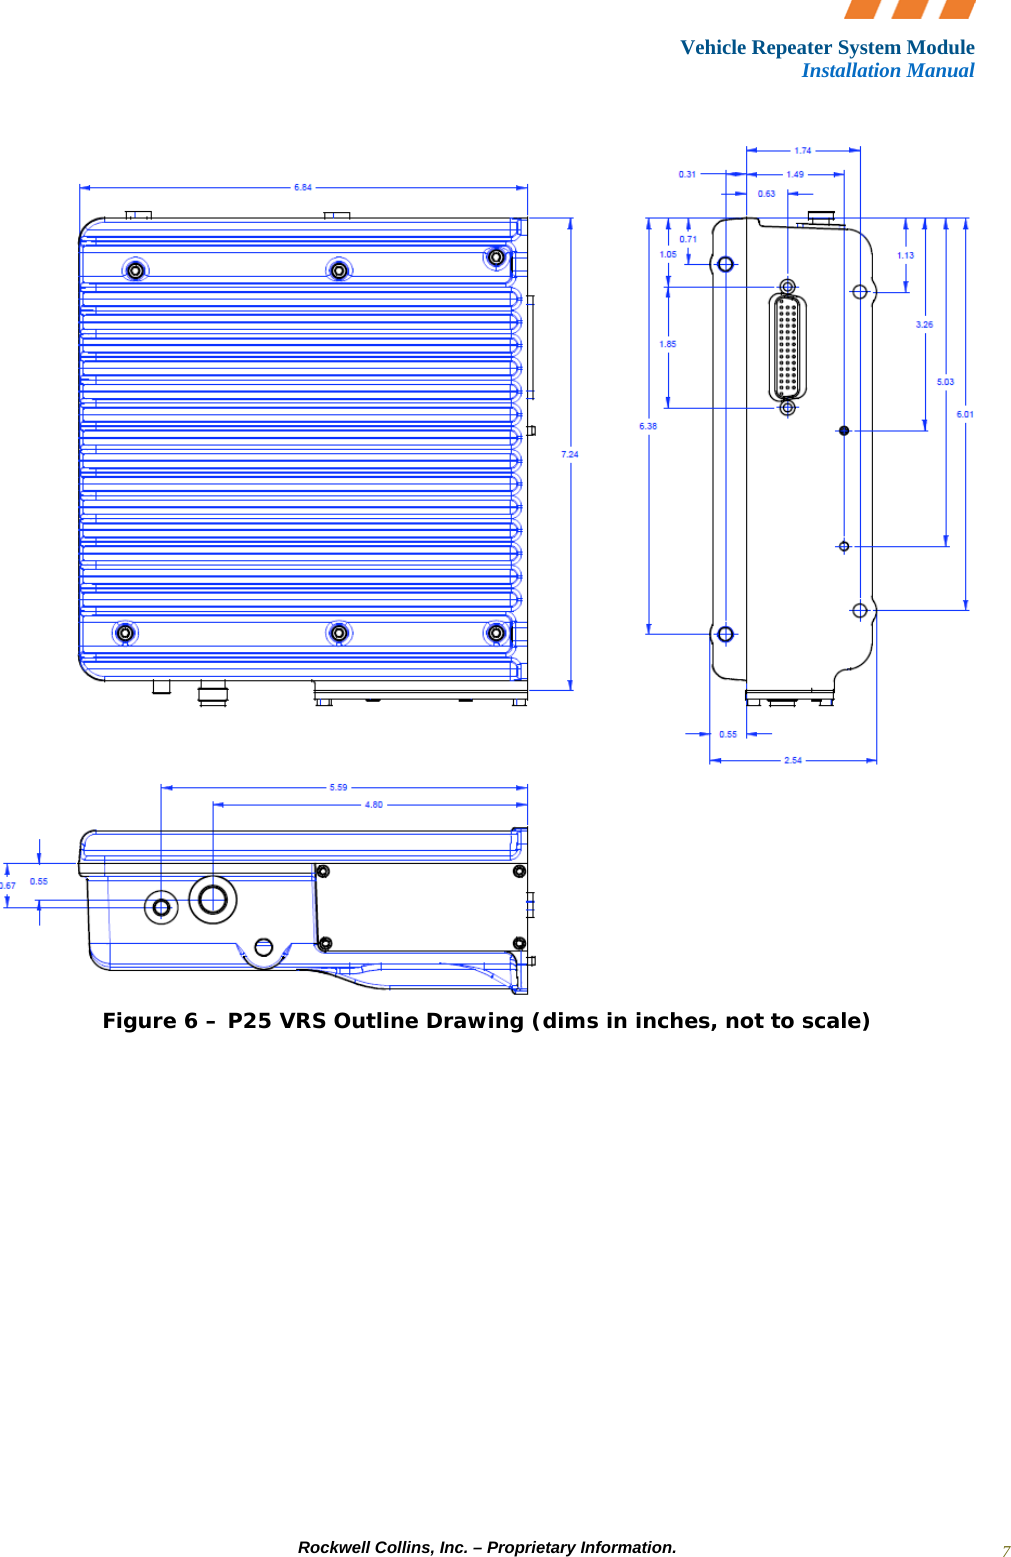 Vehicle Repeater System Module Installation Manual     Rockwell Collins, Inc. – Proprietary Information. 7  Figure 6 – P25 VRS Outline Drawing (dims in inches, not to scale)  